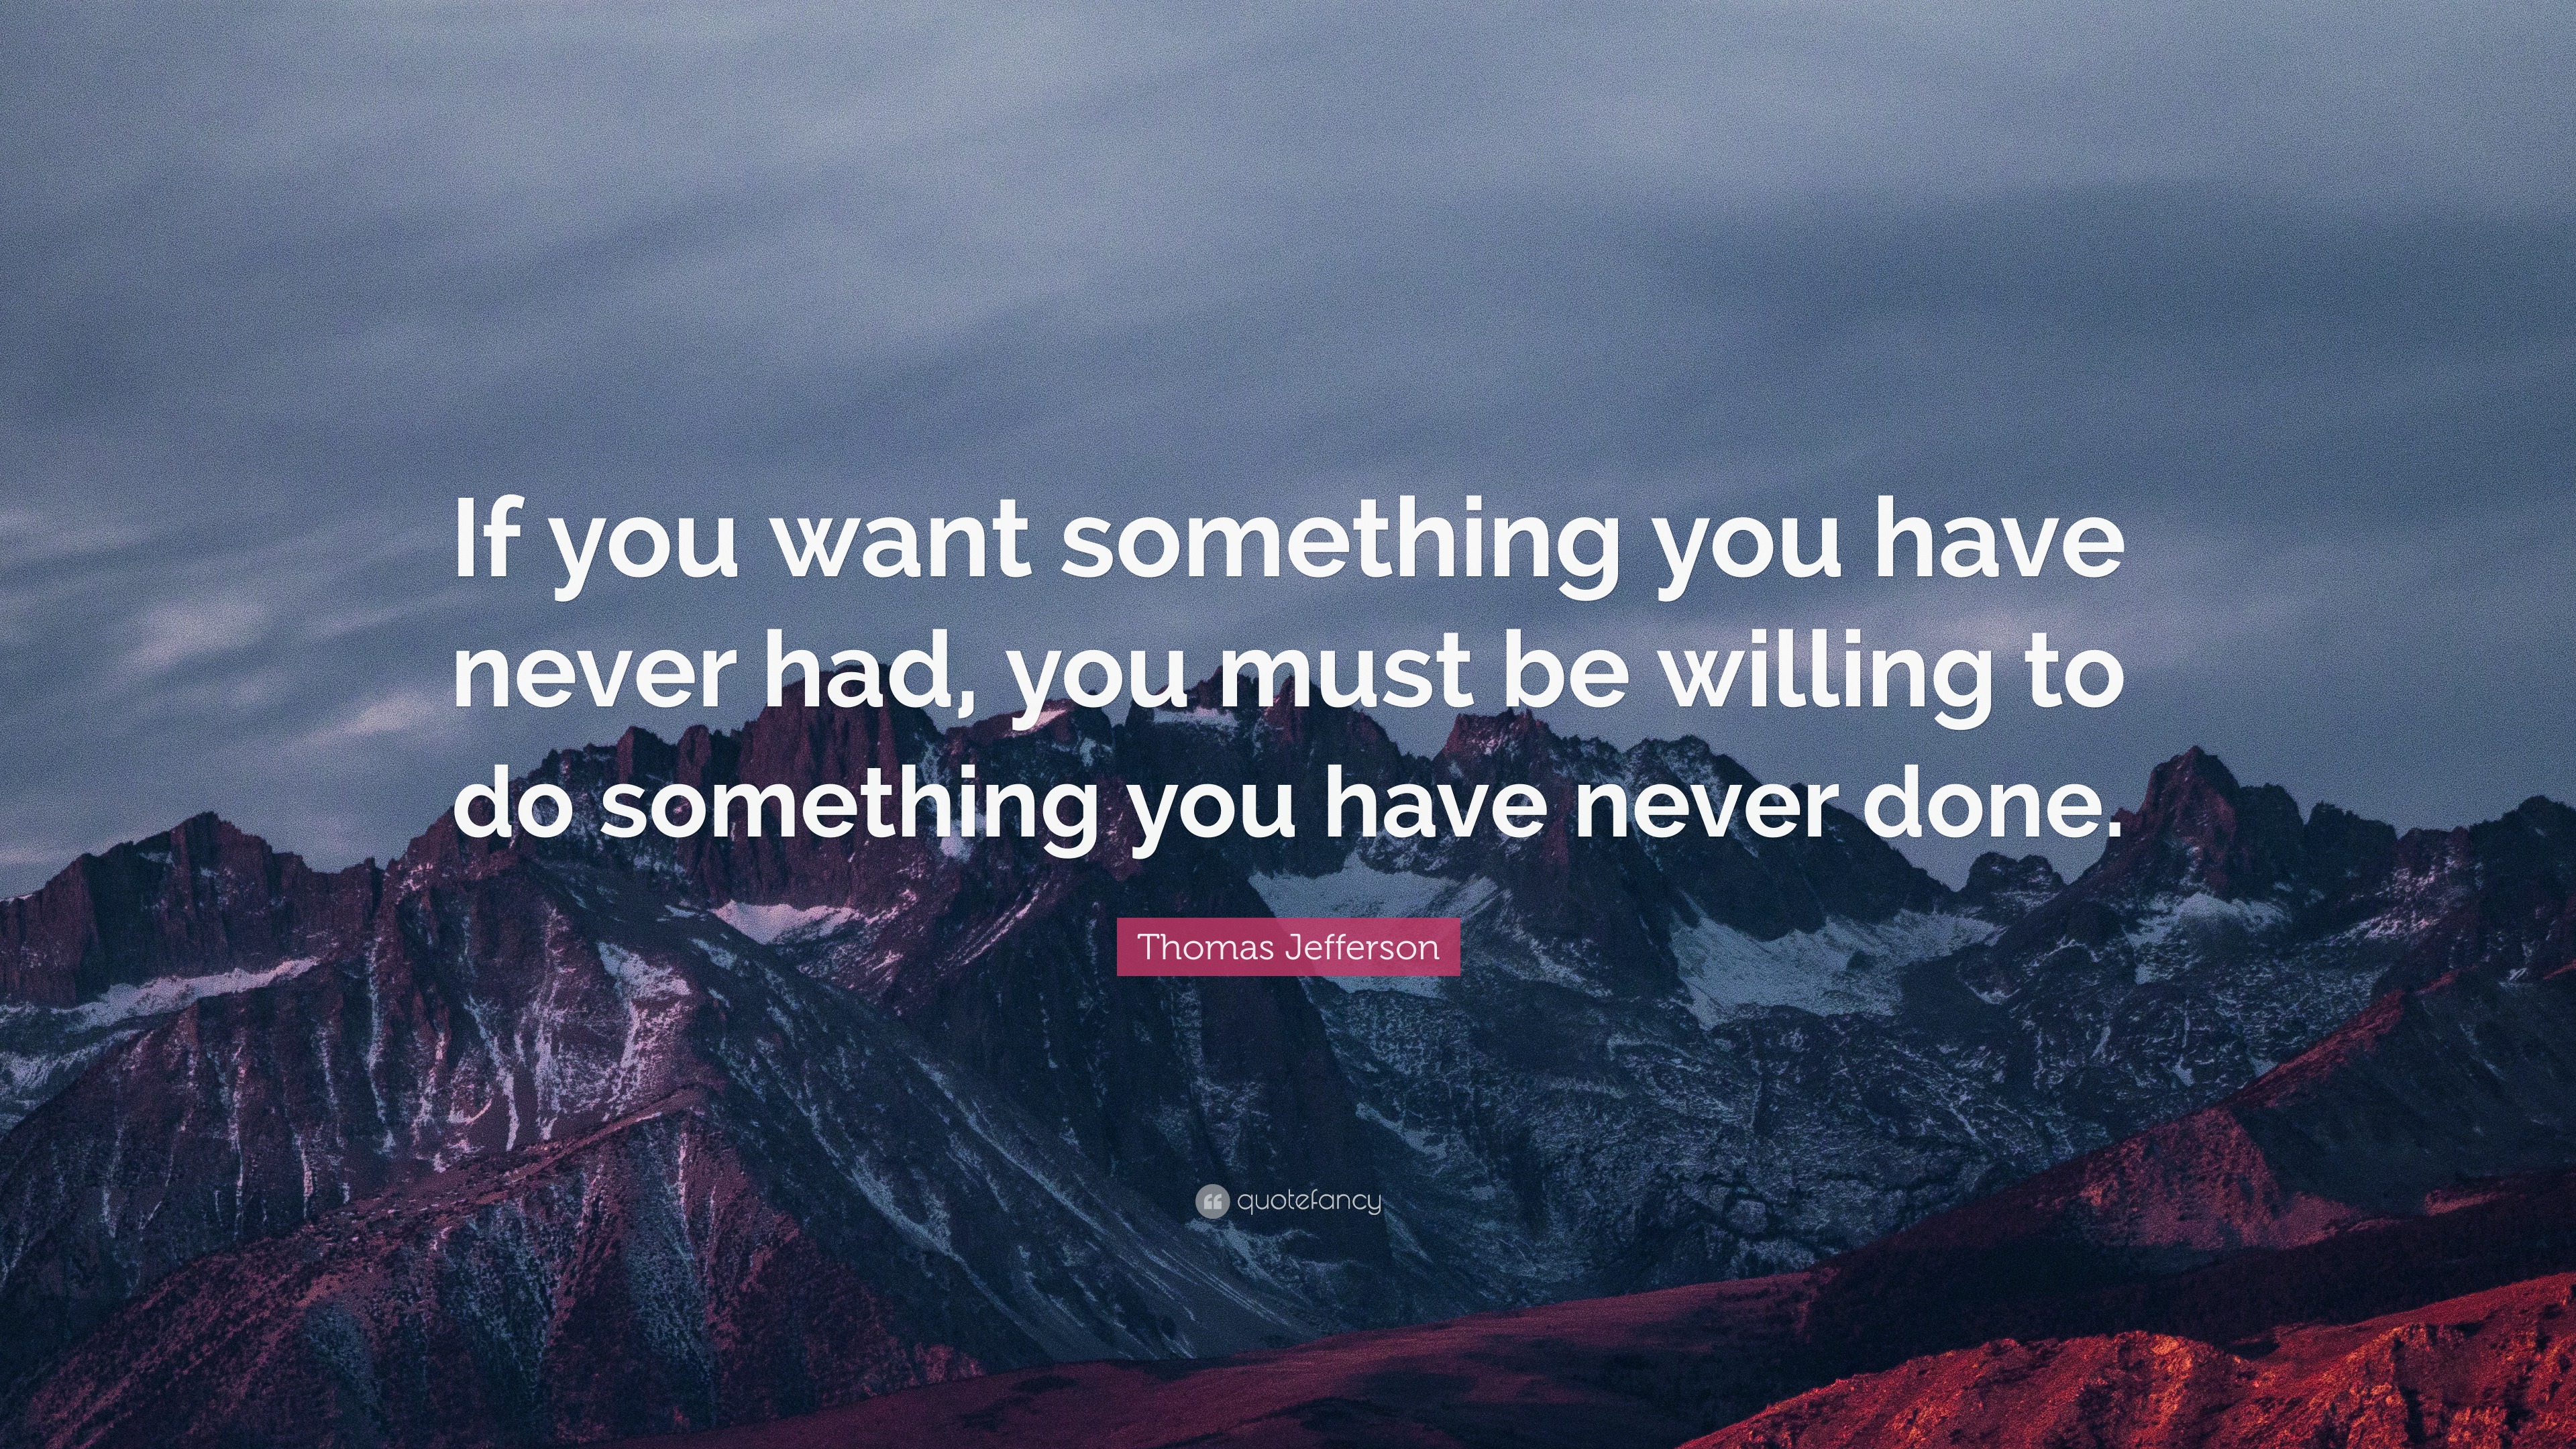 Thomas Jefferson Quote: "If you want something you have never had, you must be willing to do ...